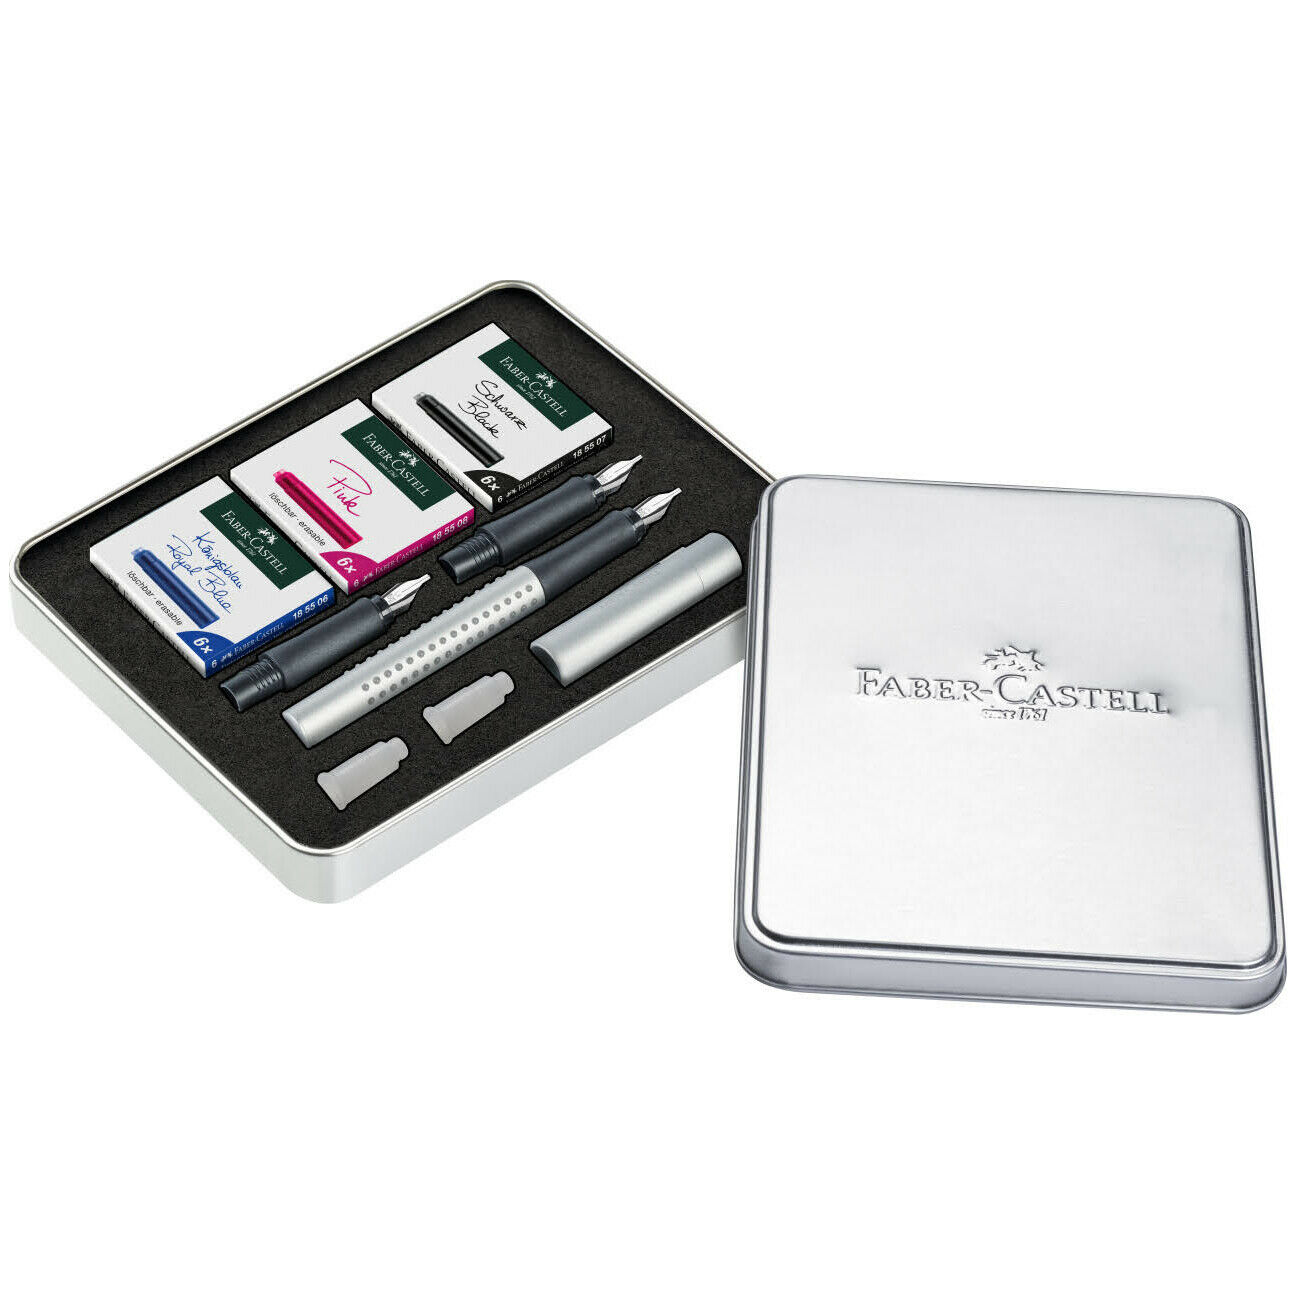 Faber Castell Grip 2011 Fountain Pen In Calligraphy Gift Set - New In Box 201629